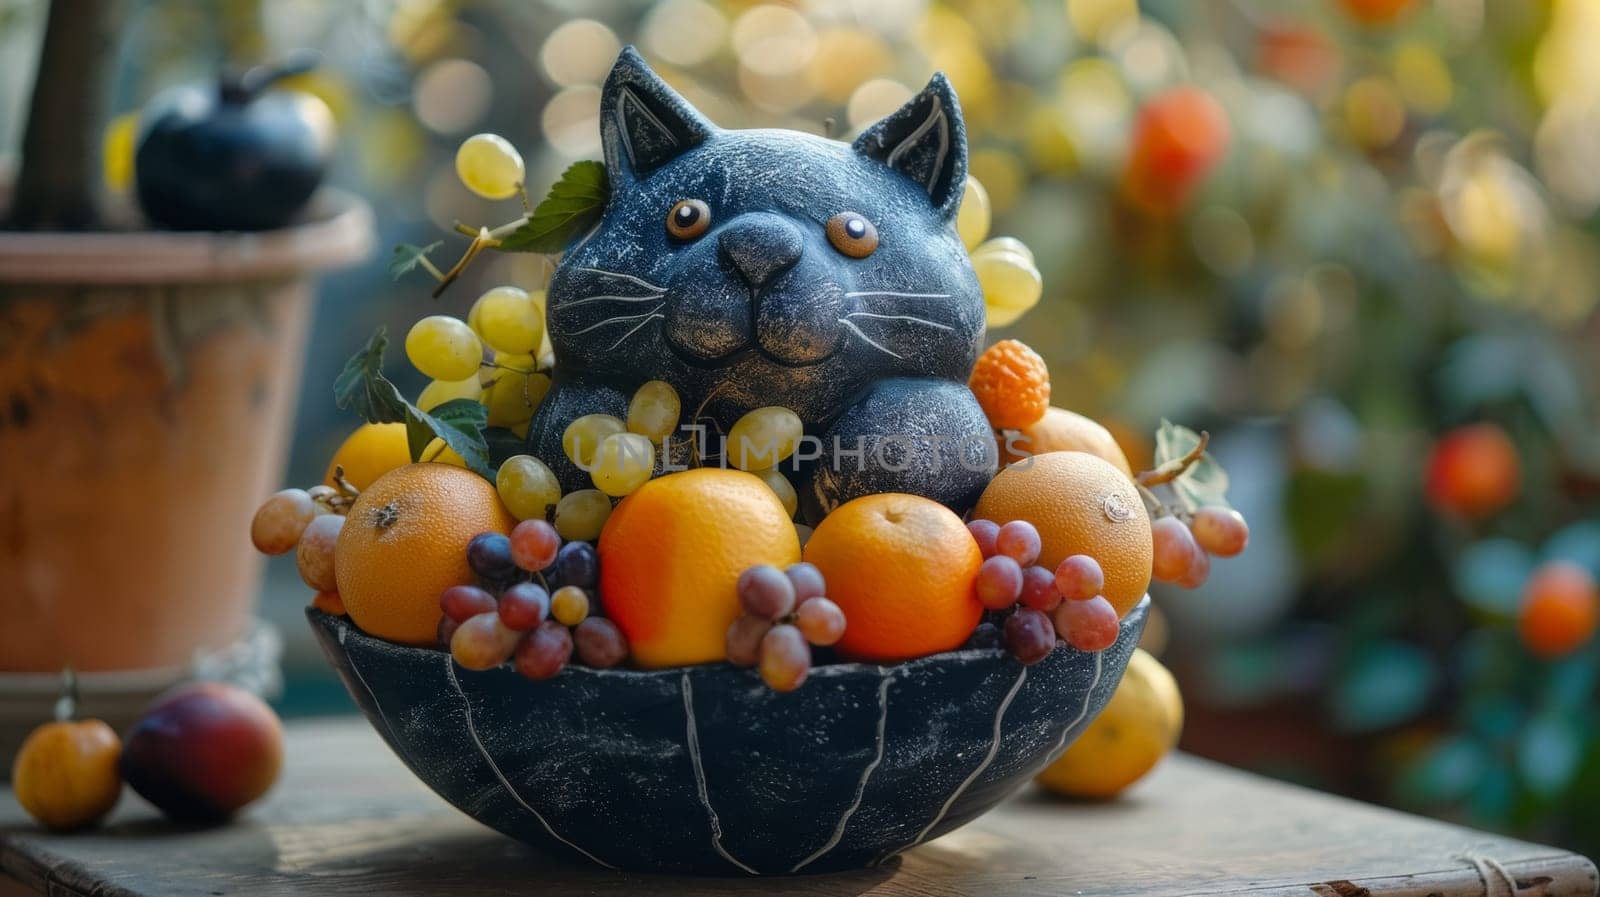 A cat statue with a bowl of fruit on top